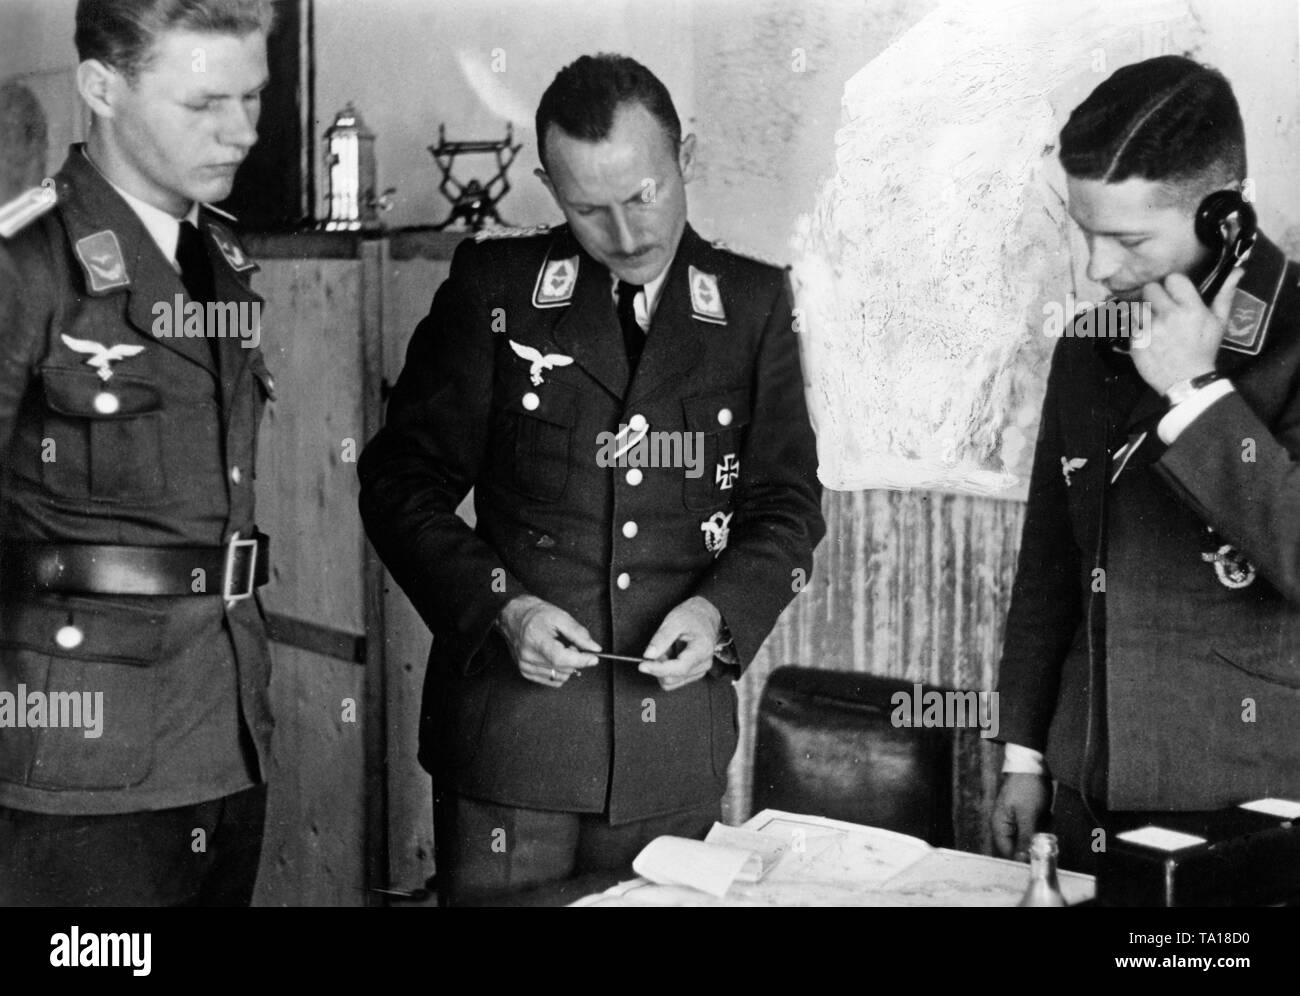 Officers of the Luftwaffe discuss the air support for the Wehrmacht on the first day of the Battle of France. The bombing of French airfields at the beginning of the Battle of France on May 10, 1940, secured the air superiority of the Luftwaffe. Photo: war correspondent Spieht. Stock Photo